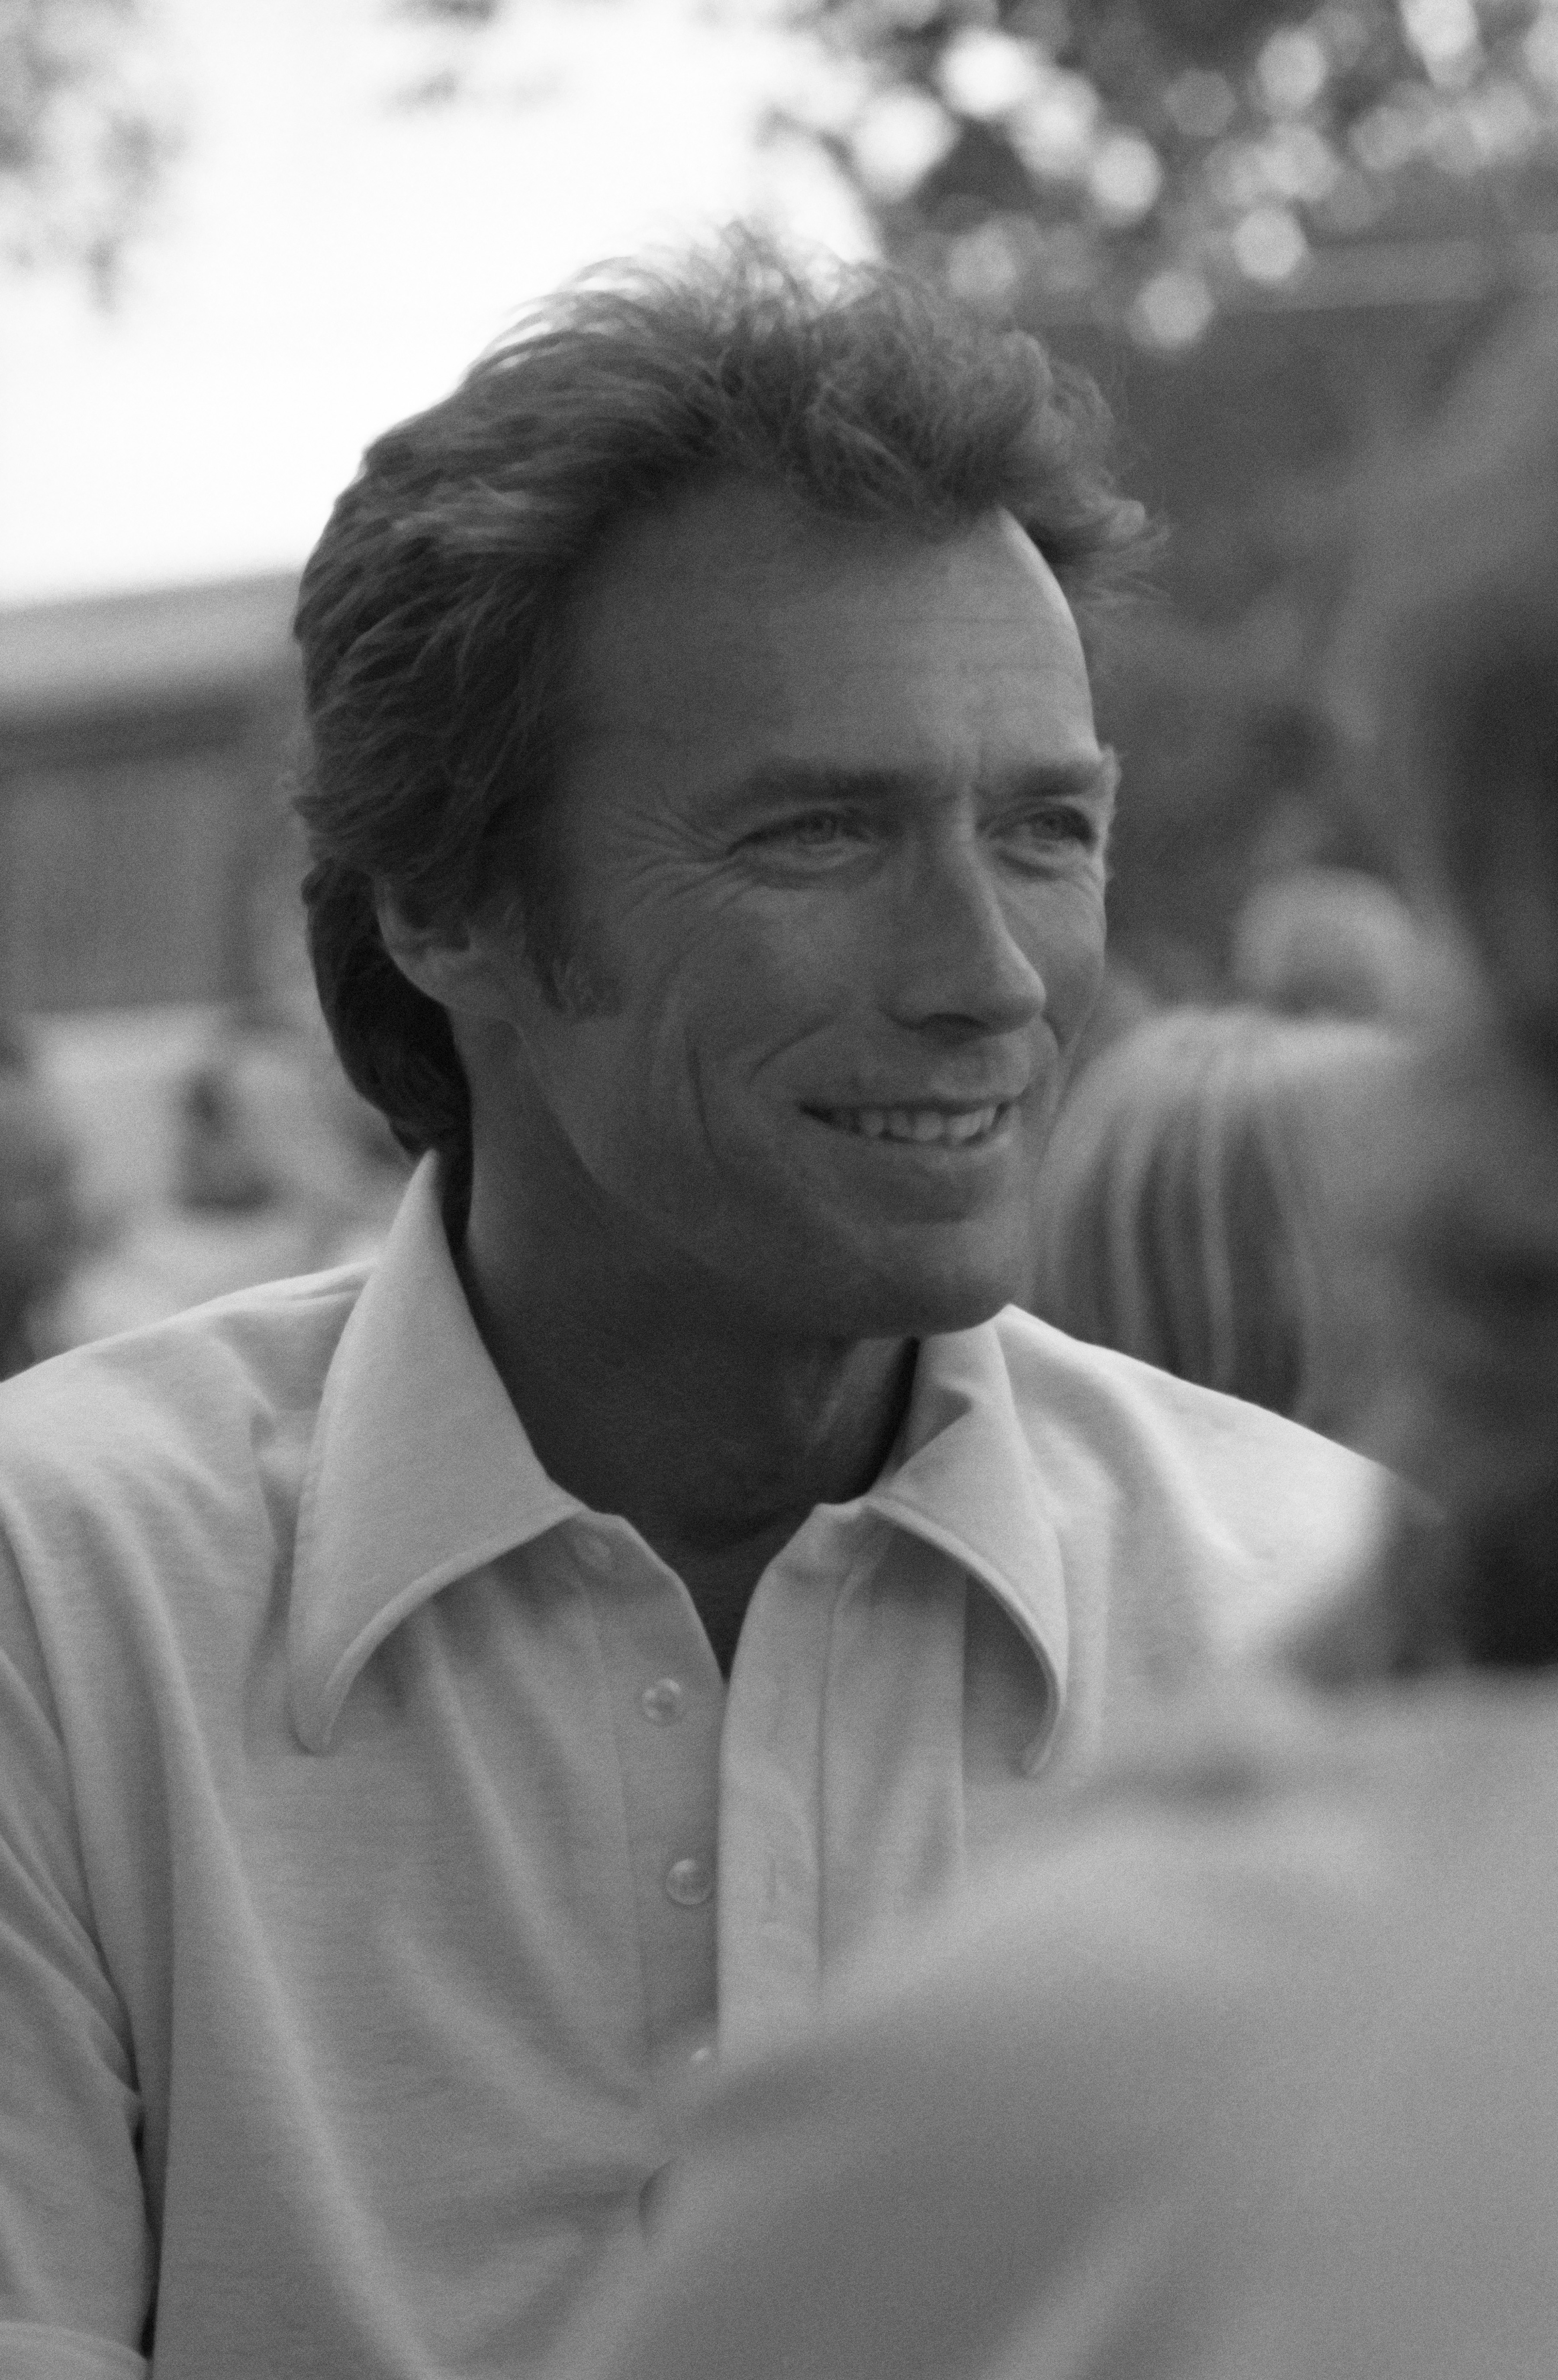 Clint smiling in casual shirt at an outdoor event